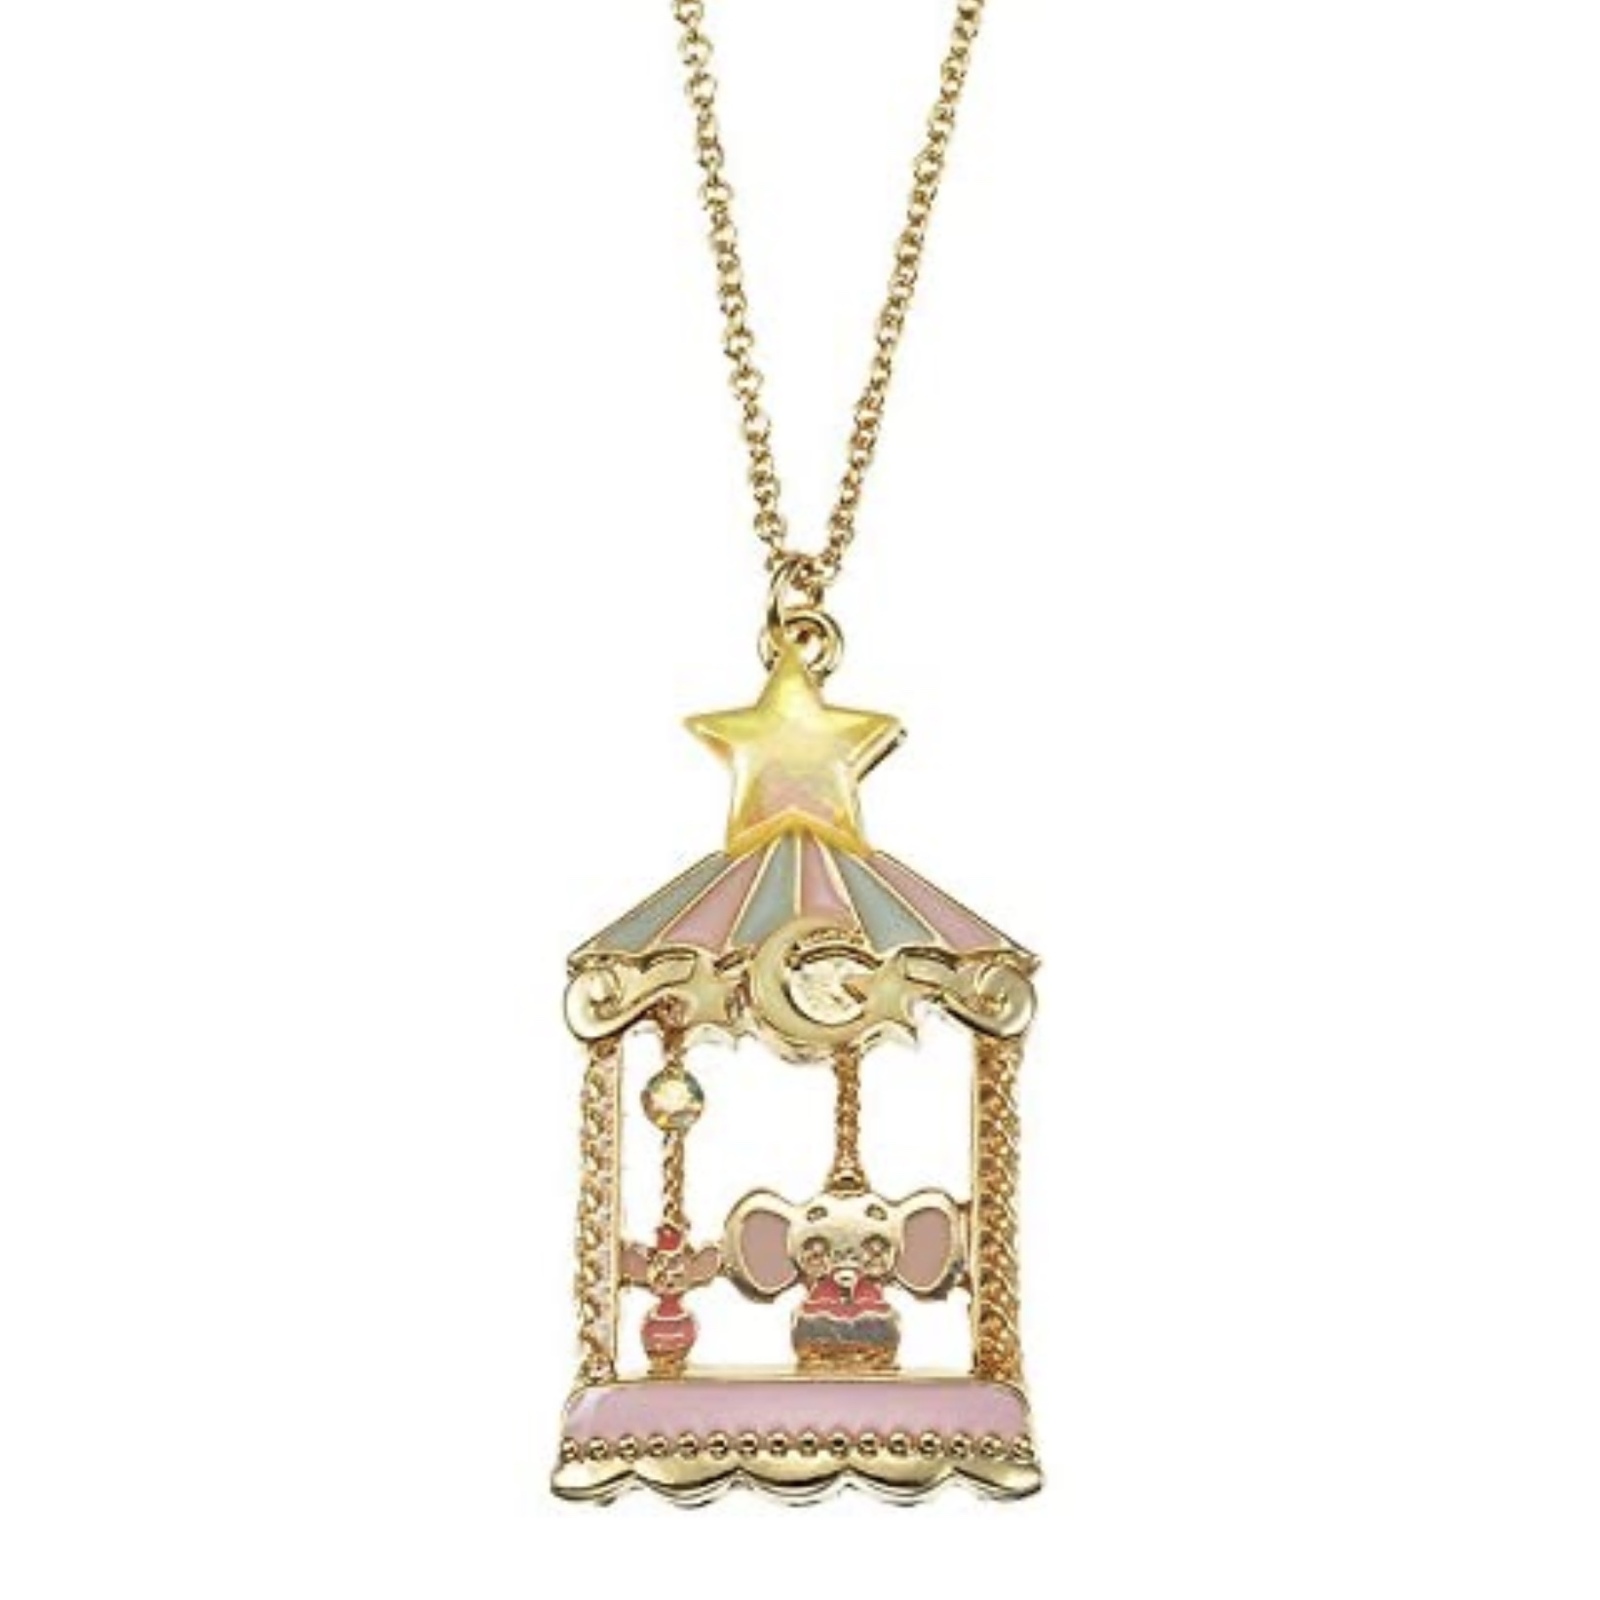 Primary image for Disney Store Japan Dumbo Carousel Necklace